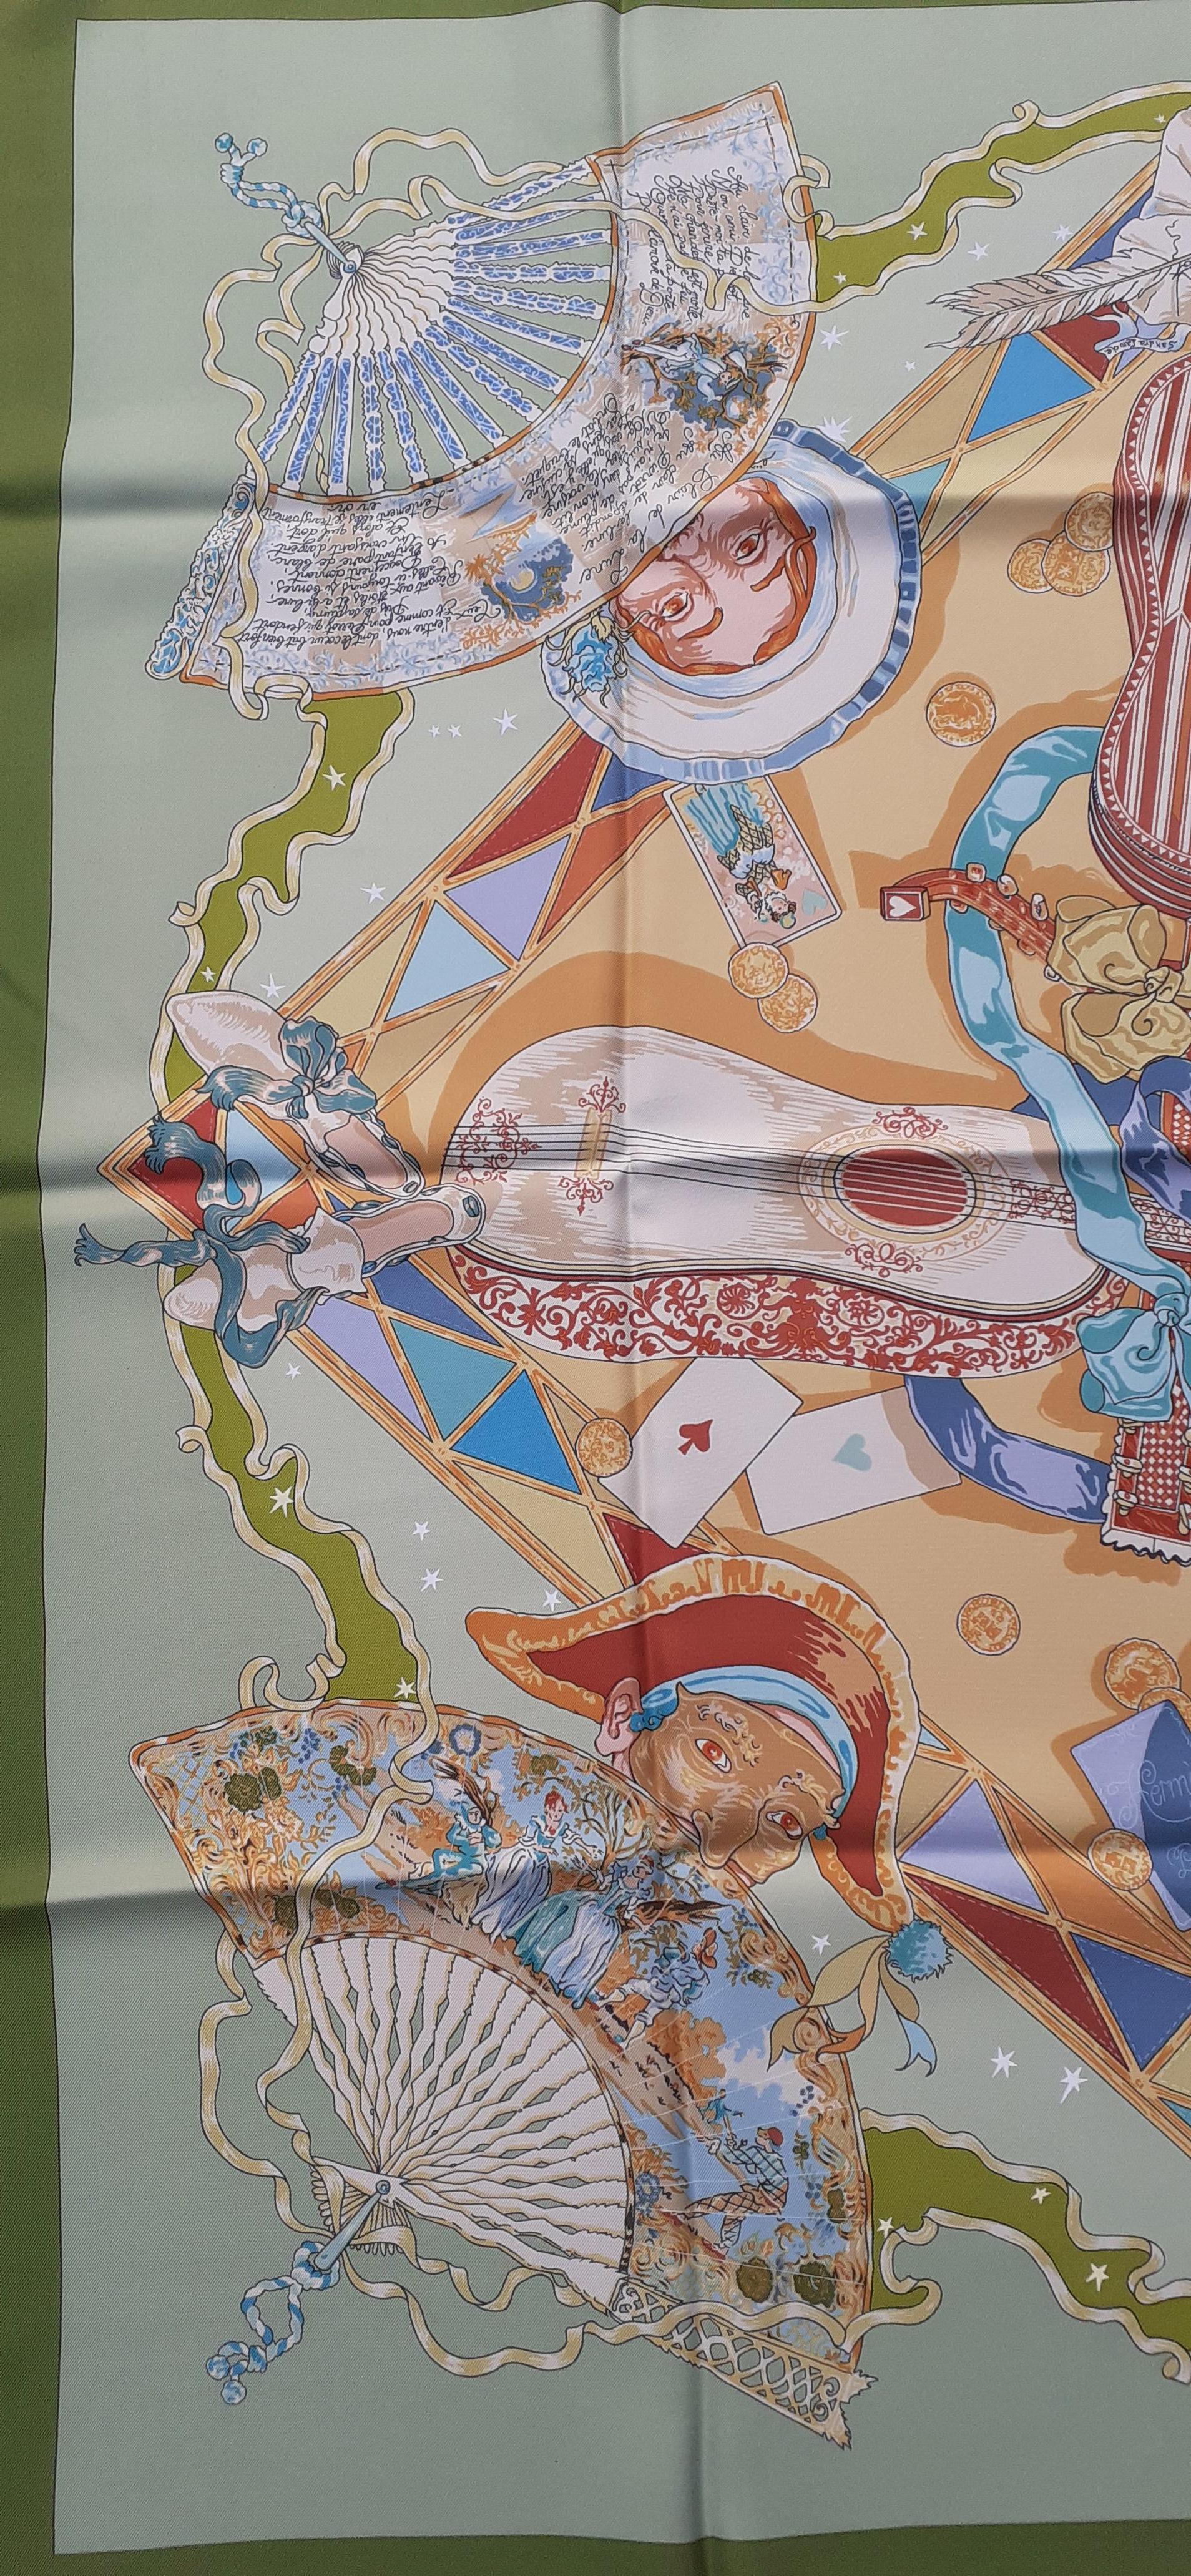 Absolutely Gorgeous Authentic Hermès Scarf

Print: 